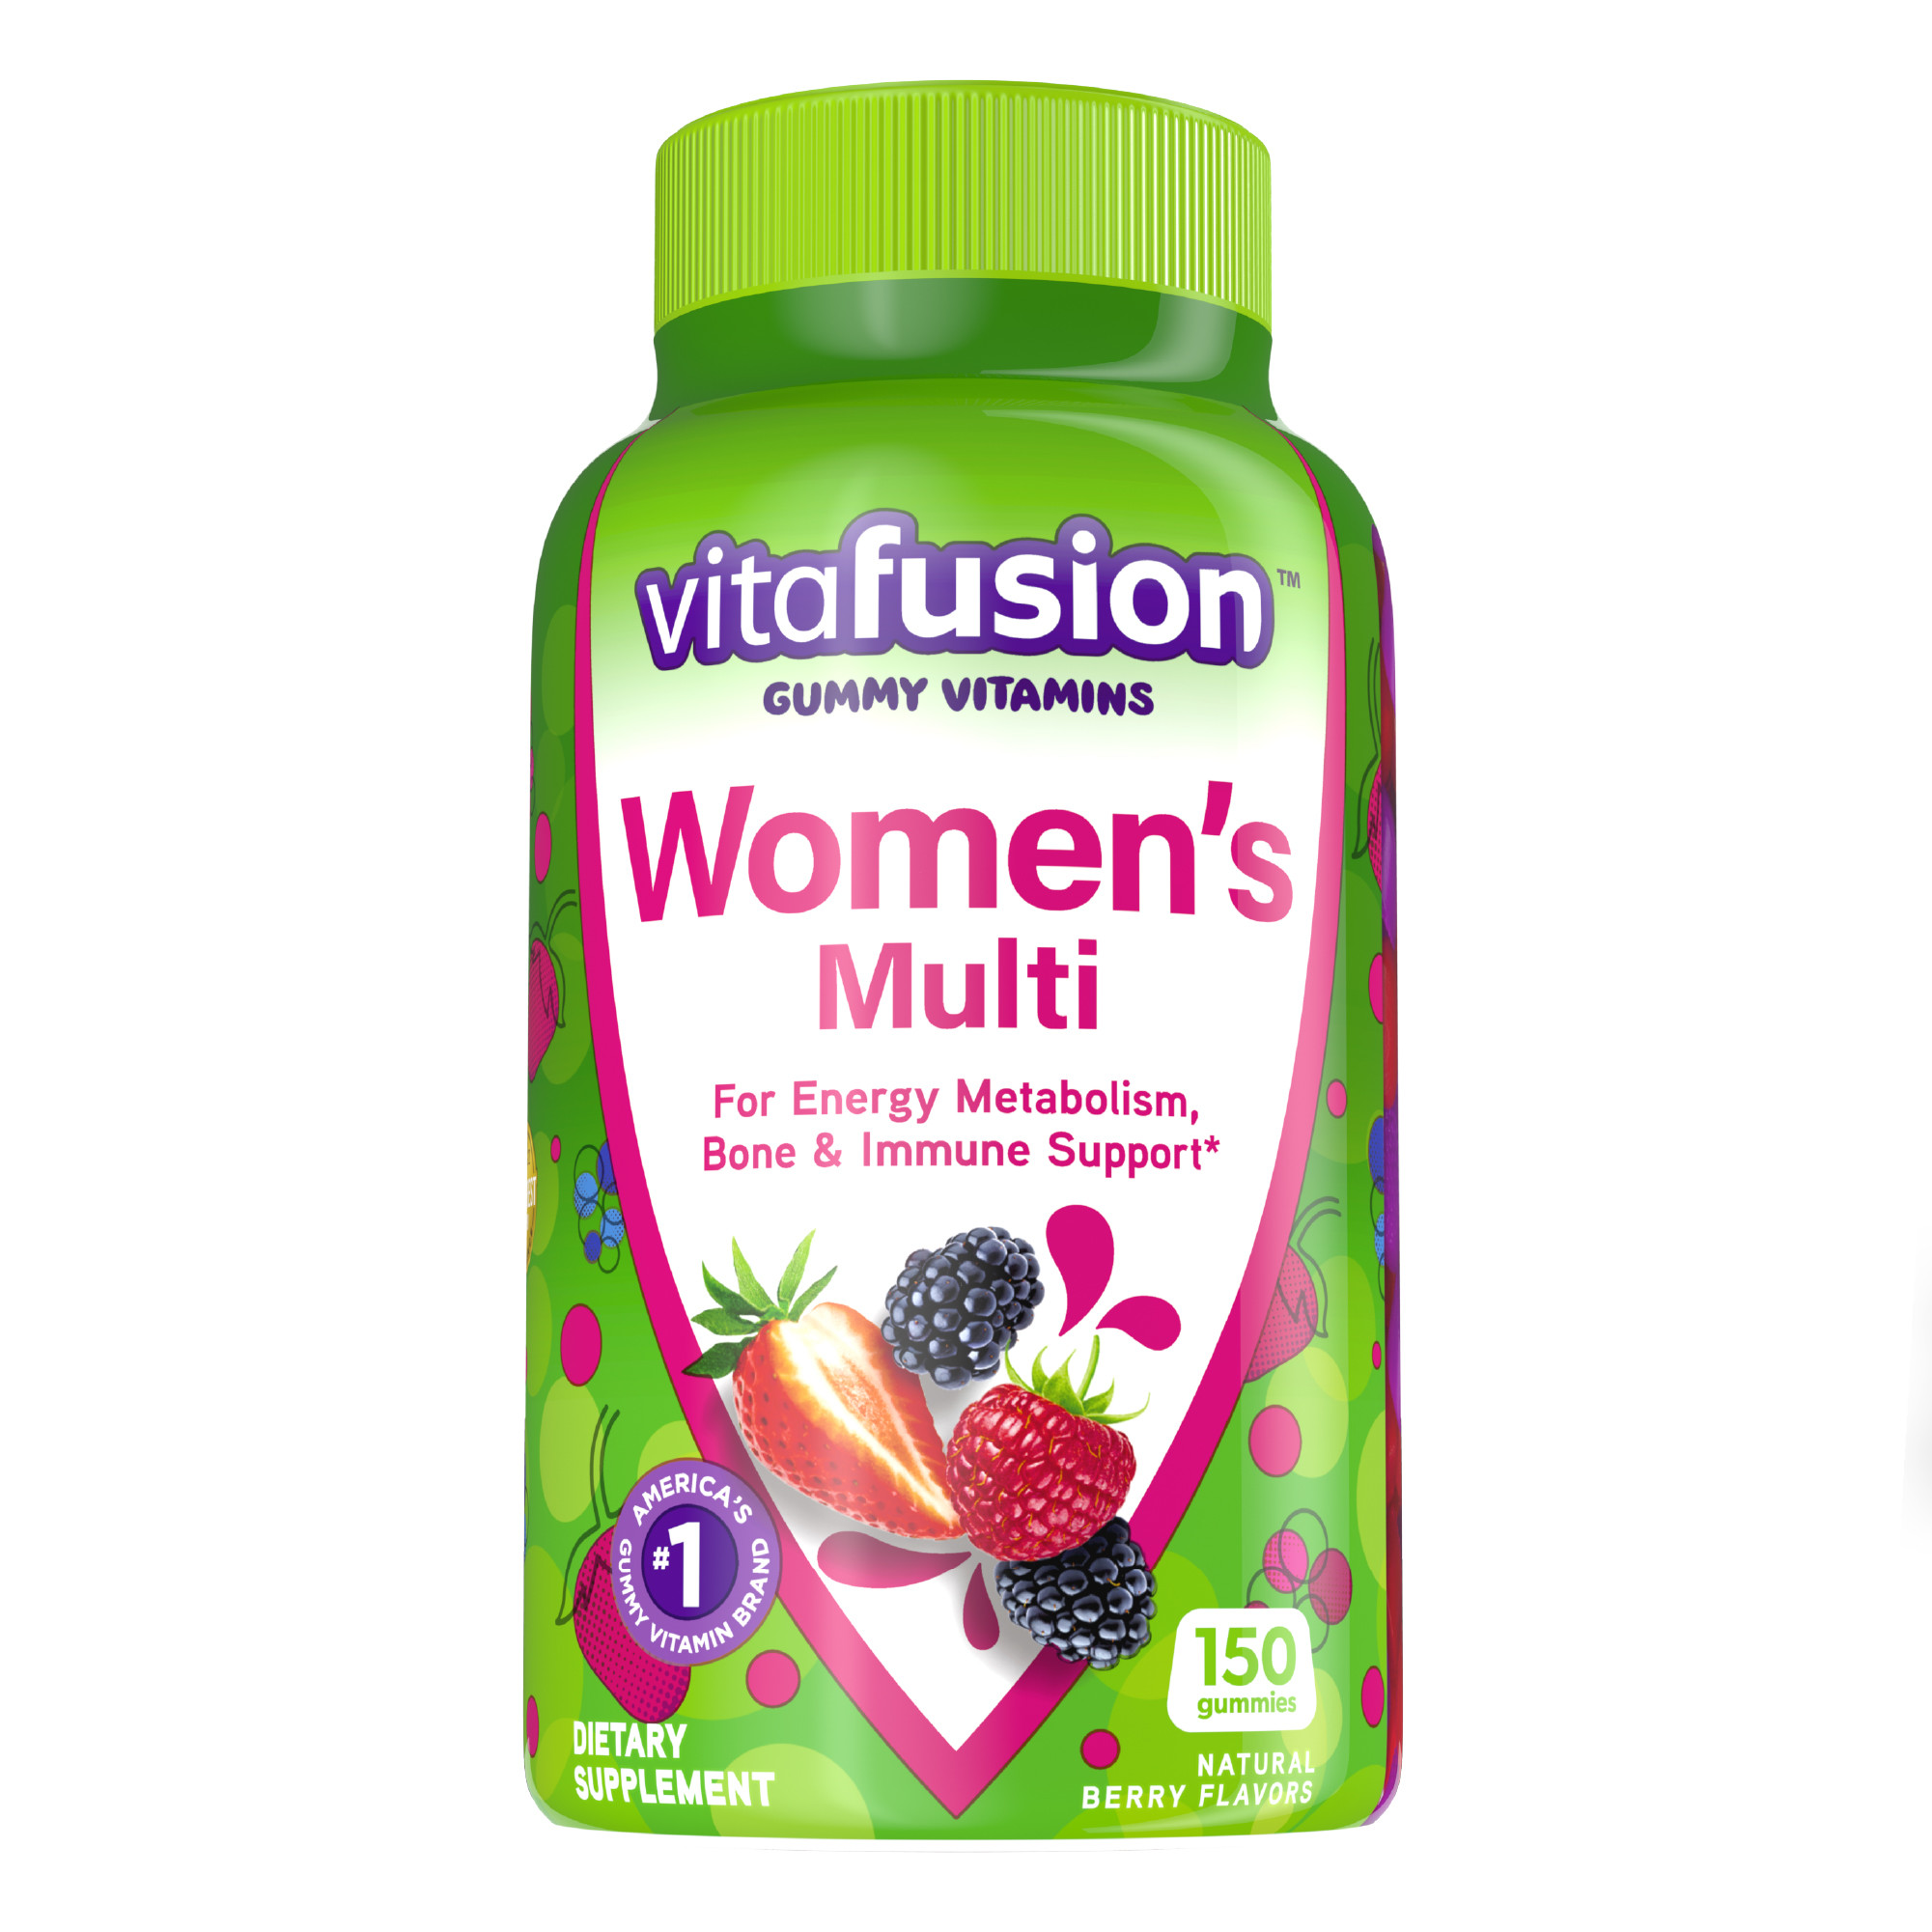 vitafusion Womens Multivitamin Gummies, Daily Vitamins for Women, Berry Flavored, 150 Count - image 1 of 13